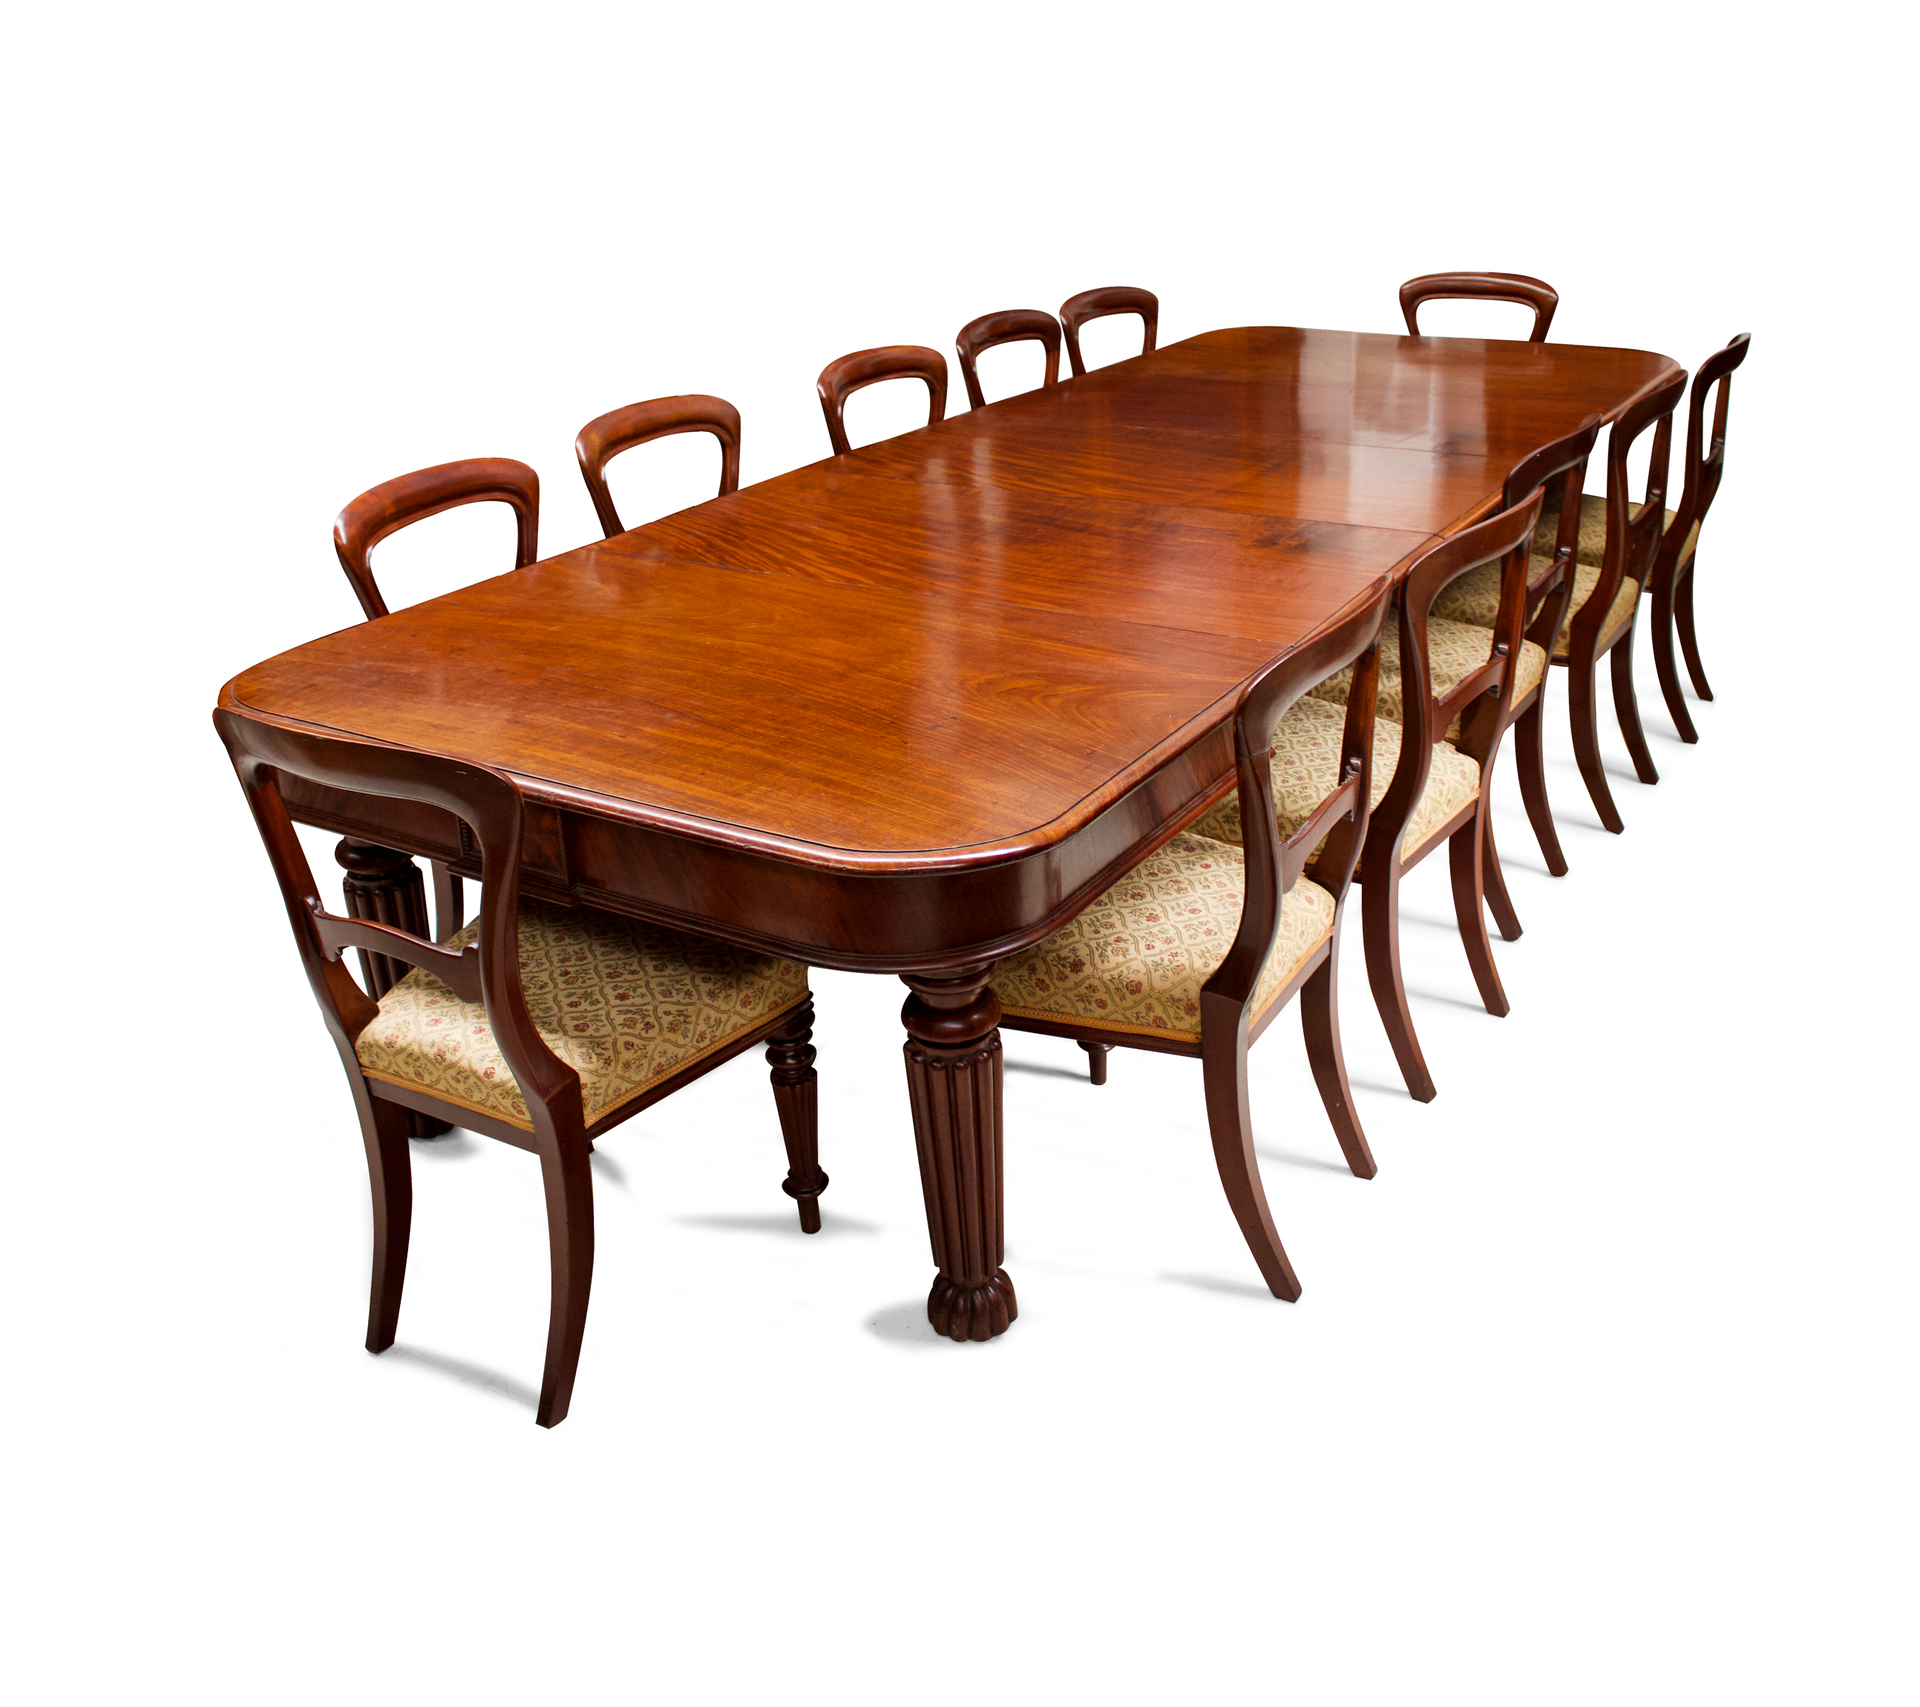 Antique mahogany dining table, 12 mahogany chairs ,reeded legs, Gillows ,Maple & Co